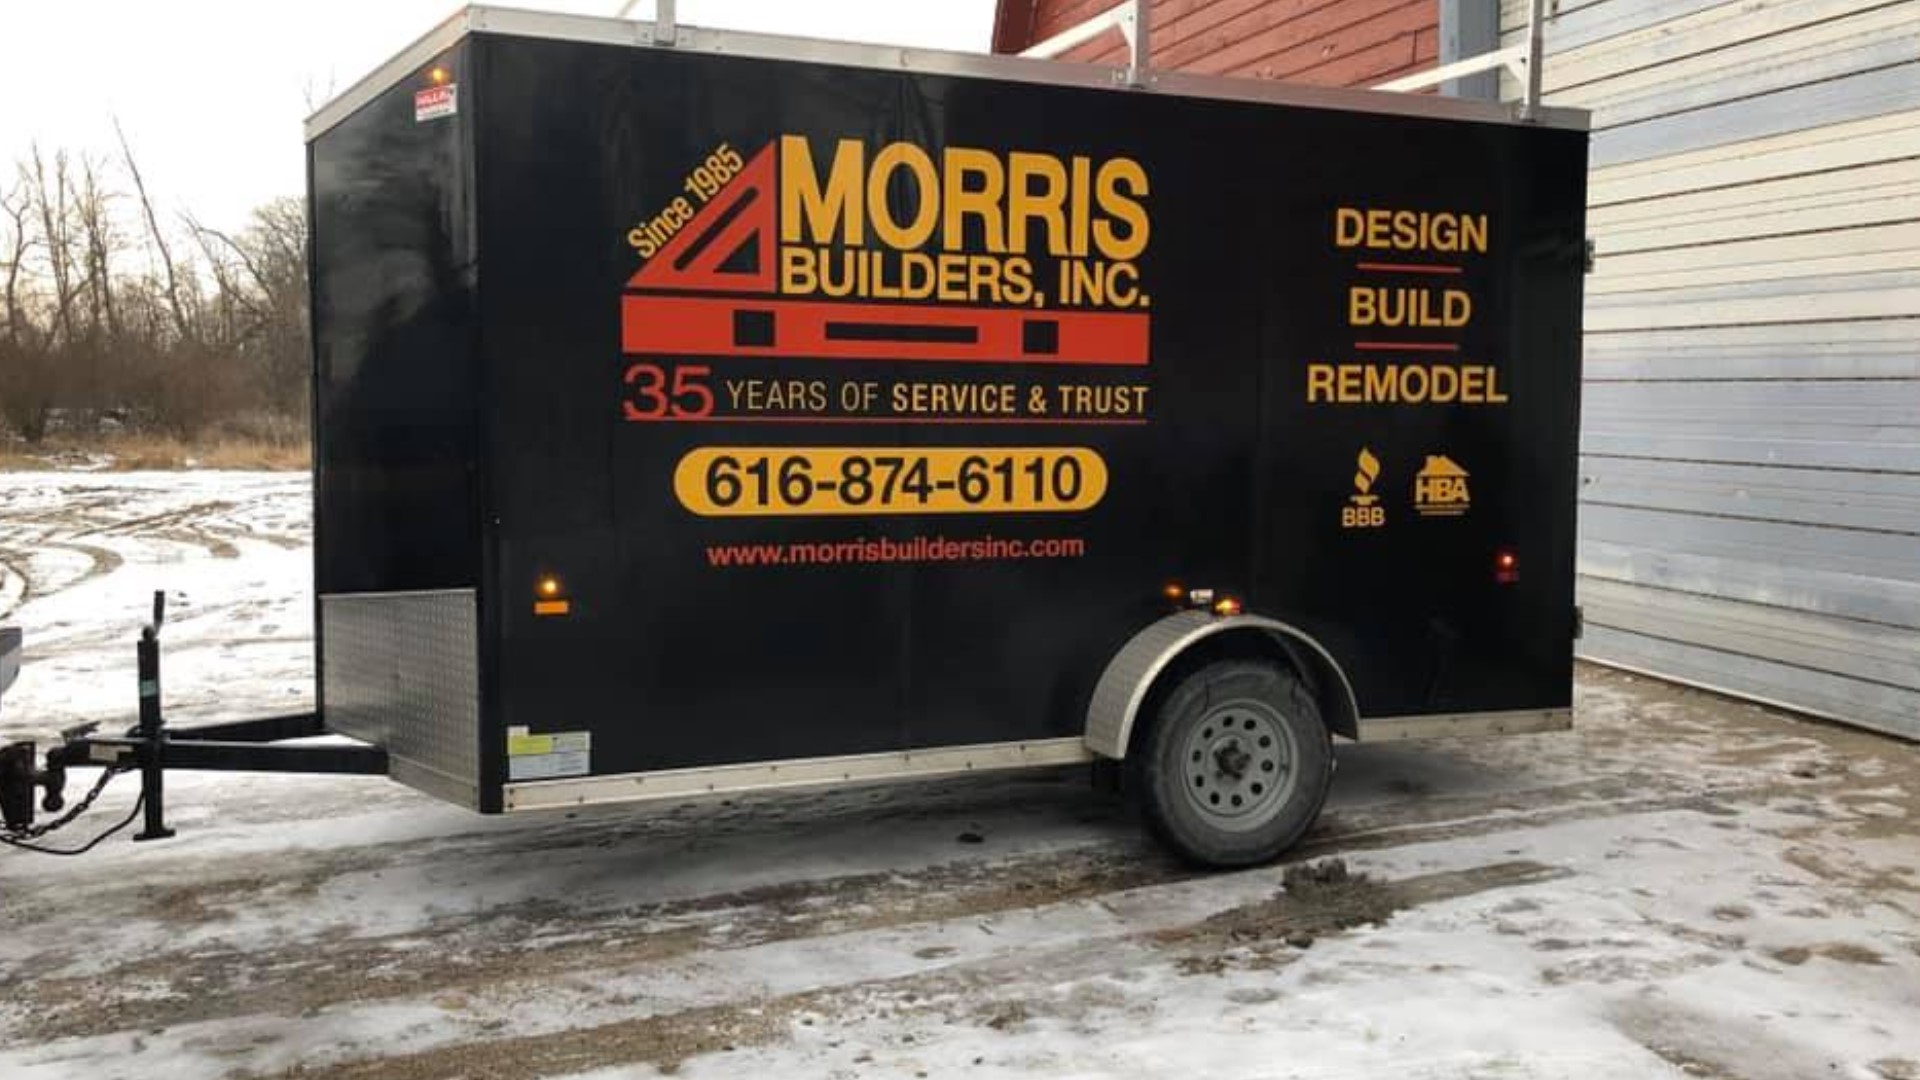 The family owned business, Morris Builders, will be at the GR Remodeling and New Home Show celebrating their 35th Anniversary and sharing more about their work.